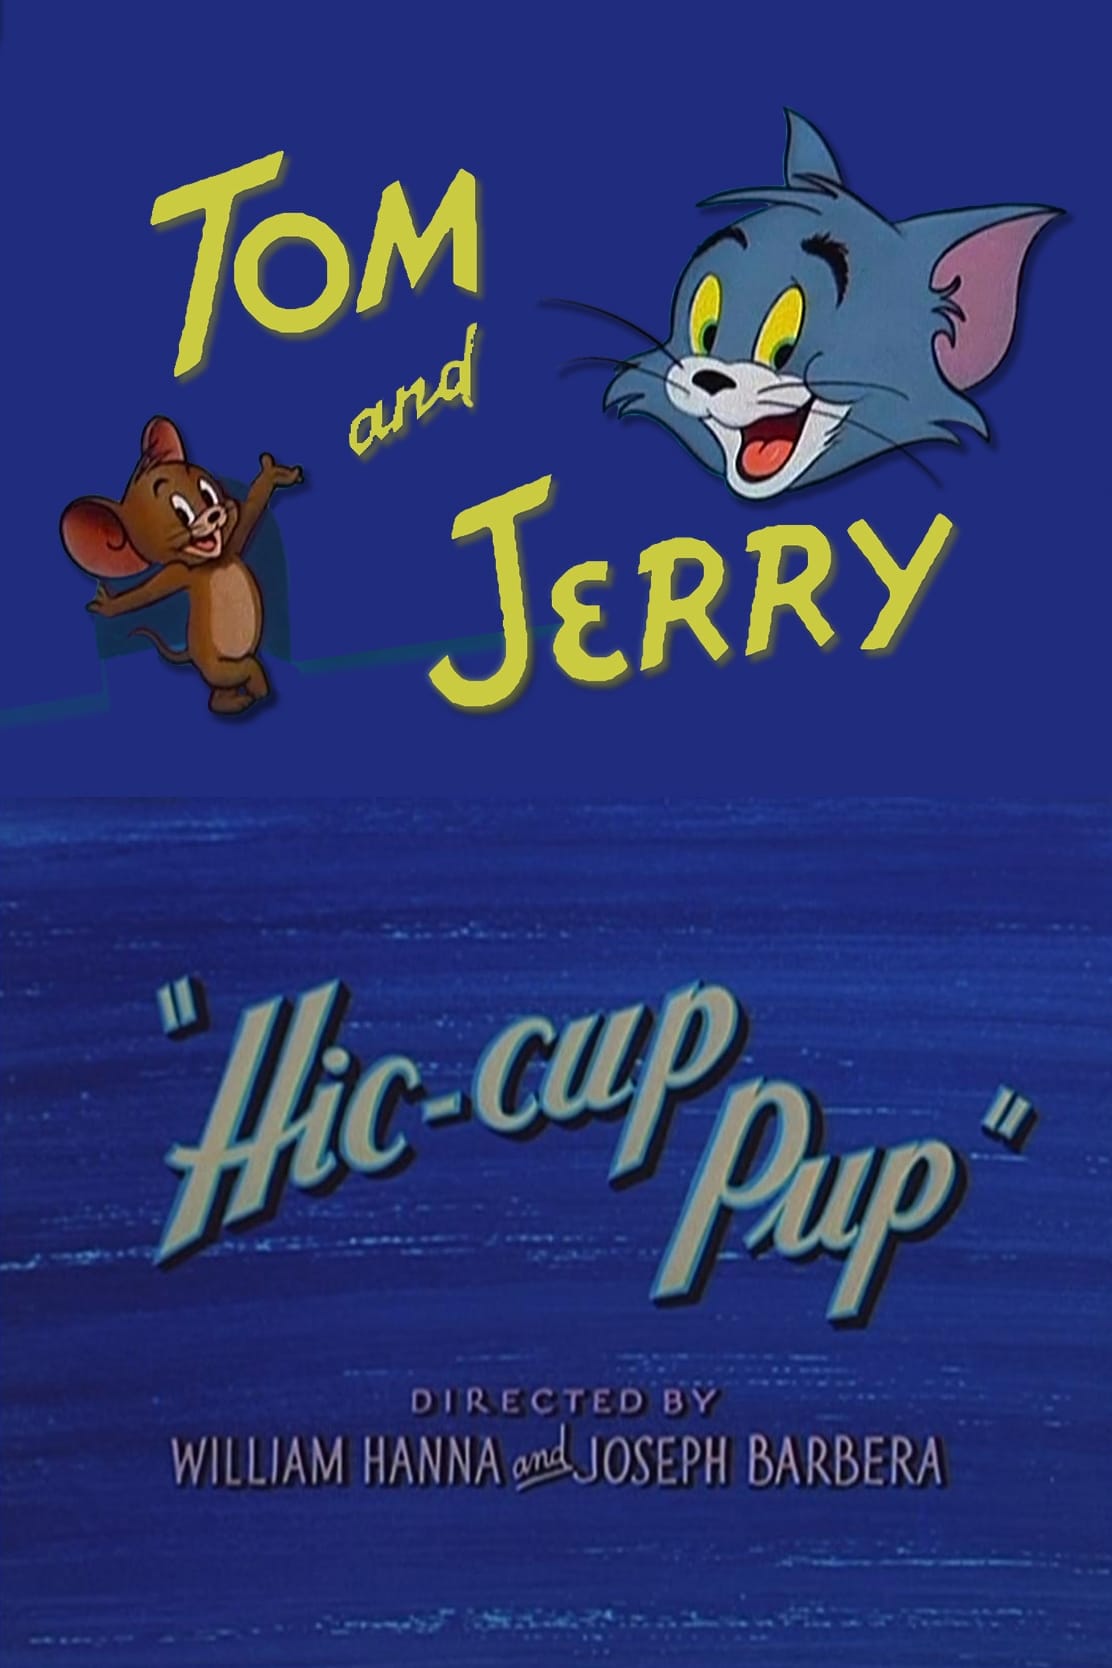 Hic-cup Pup (1954)